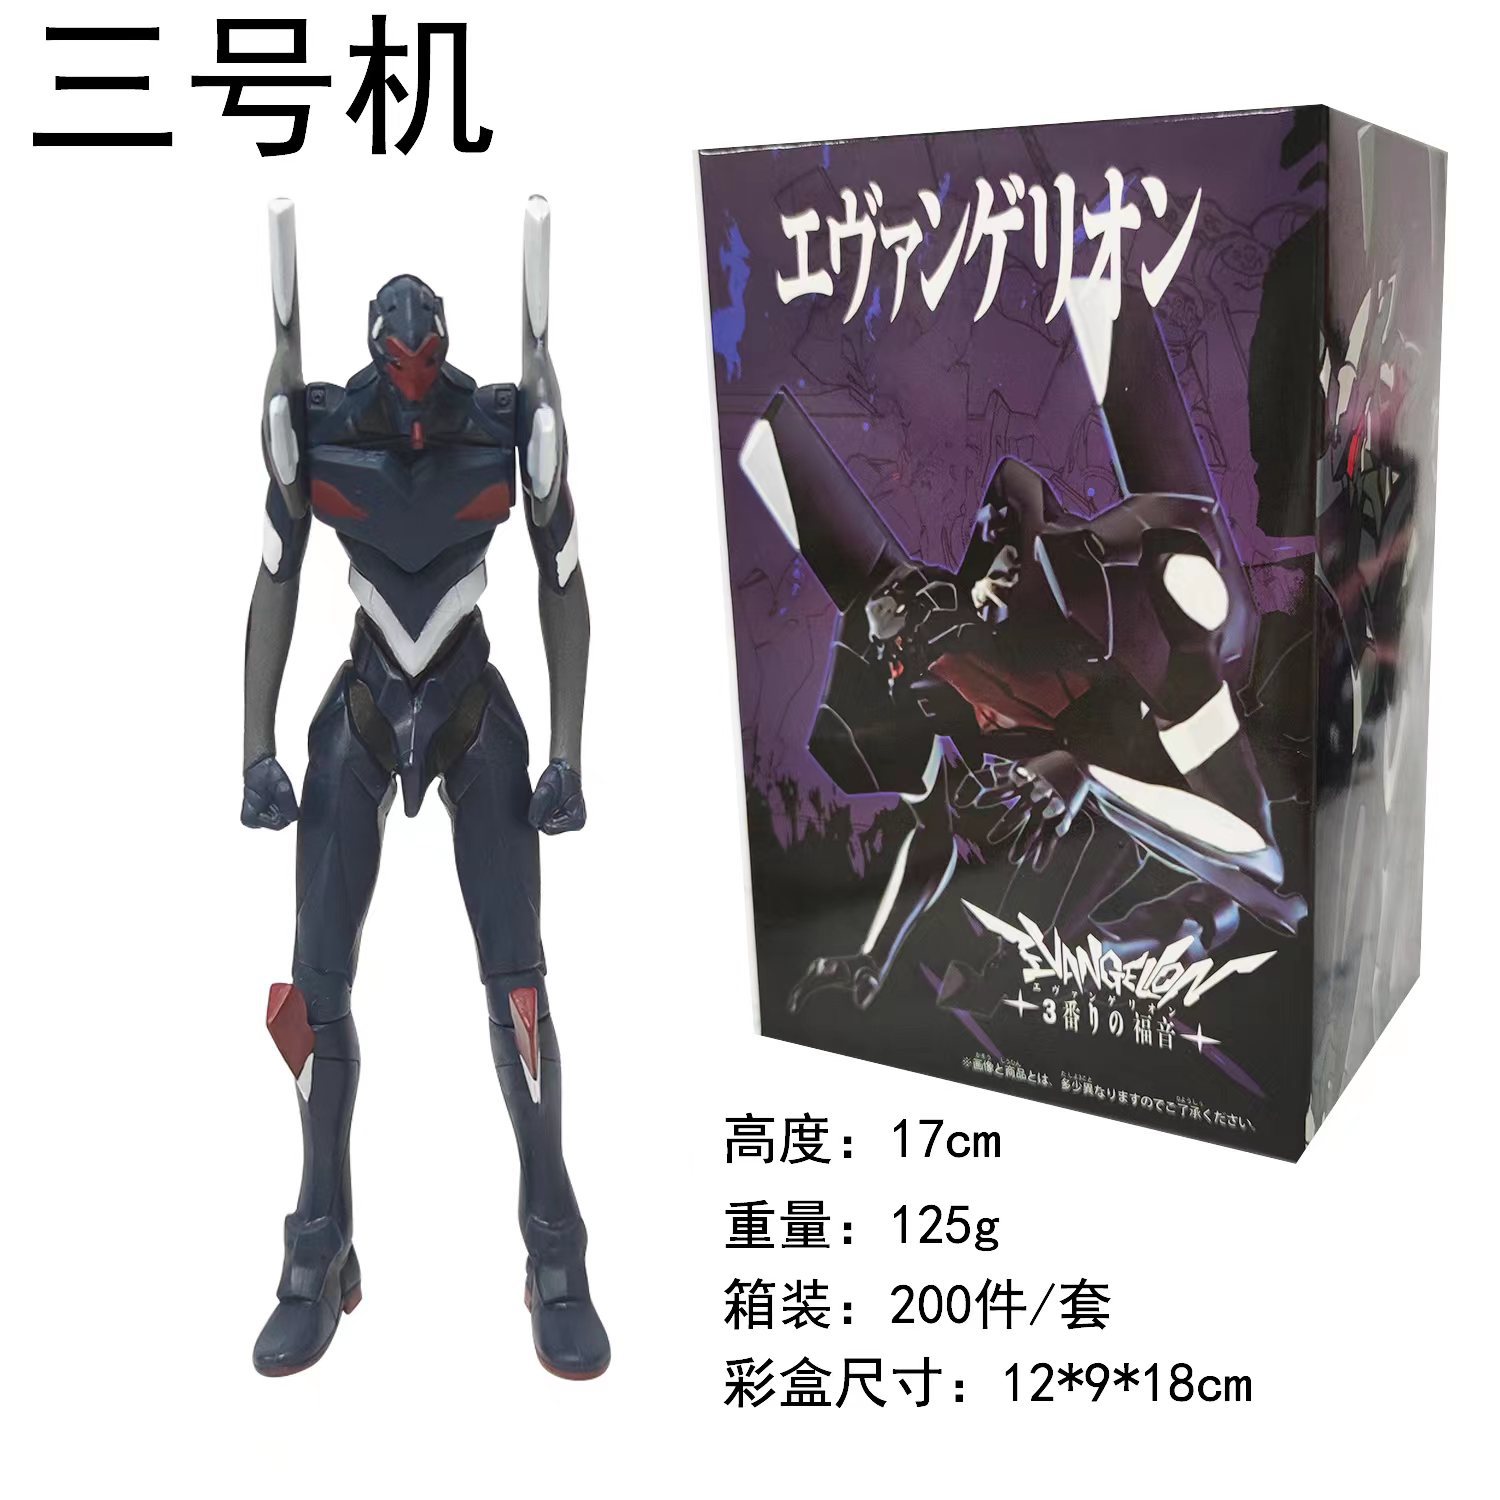 Neon Genesis Evangelion Evangelion Hand-Made No. 2 Machine Movable Puppet Model Hand-Made Toys Peripheral Anime